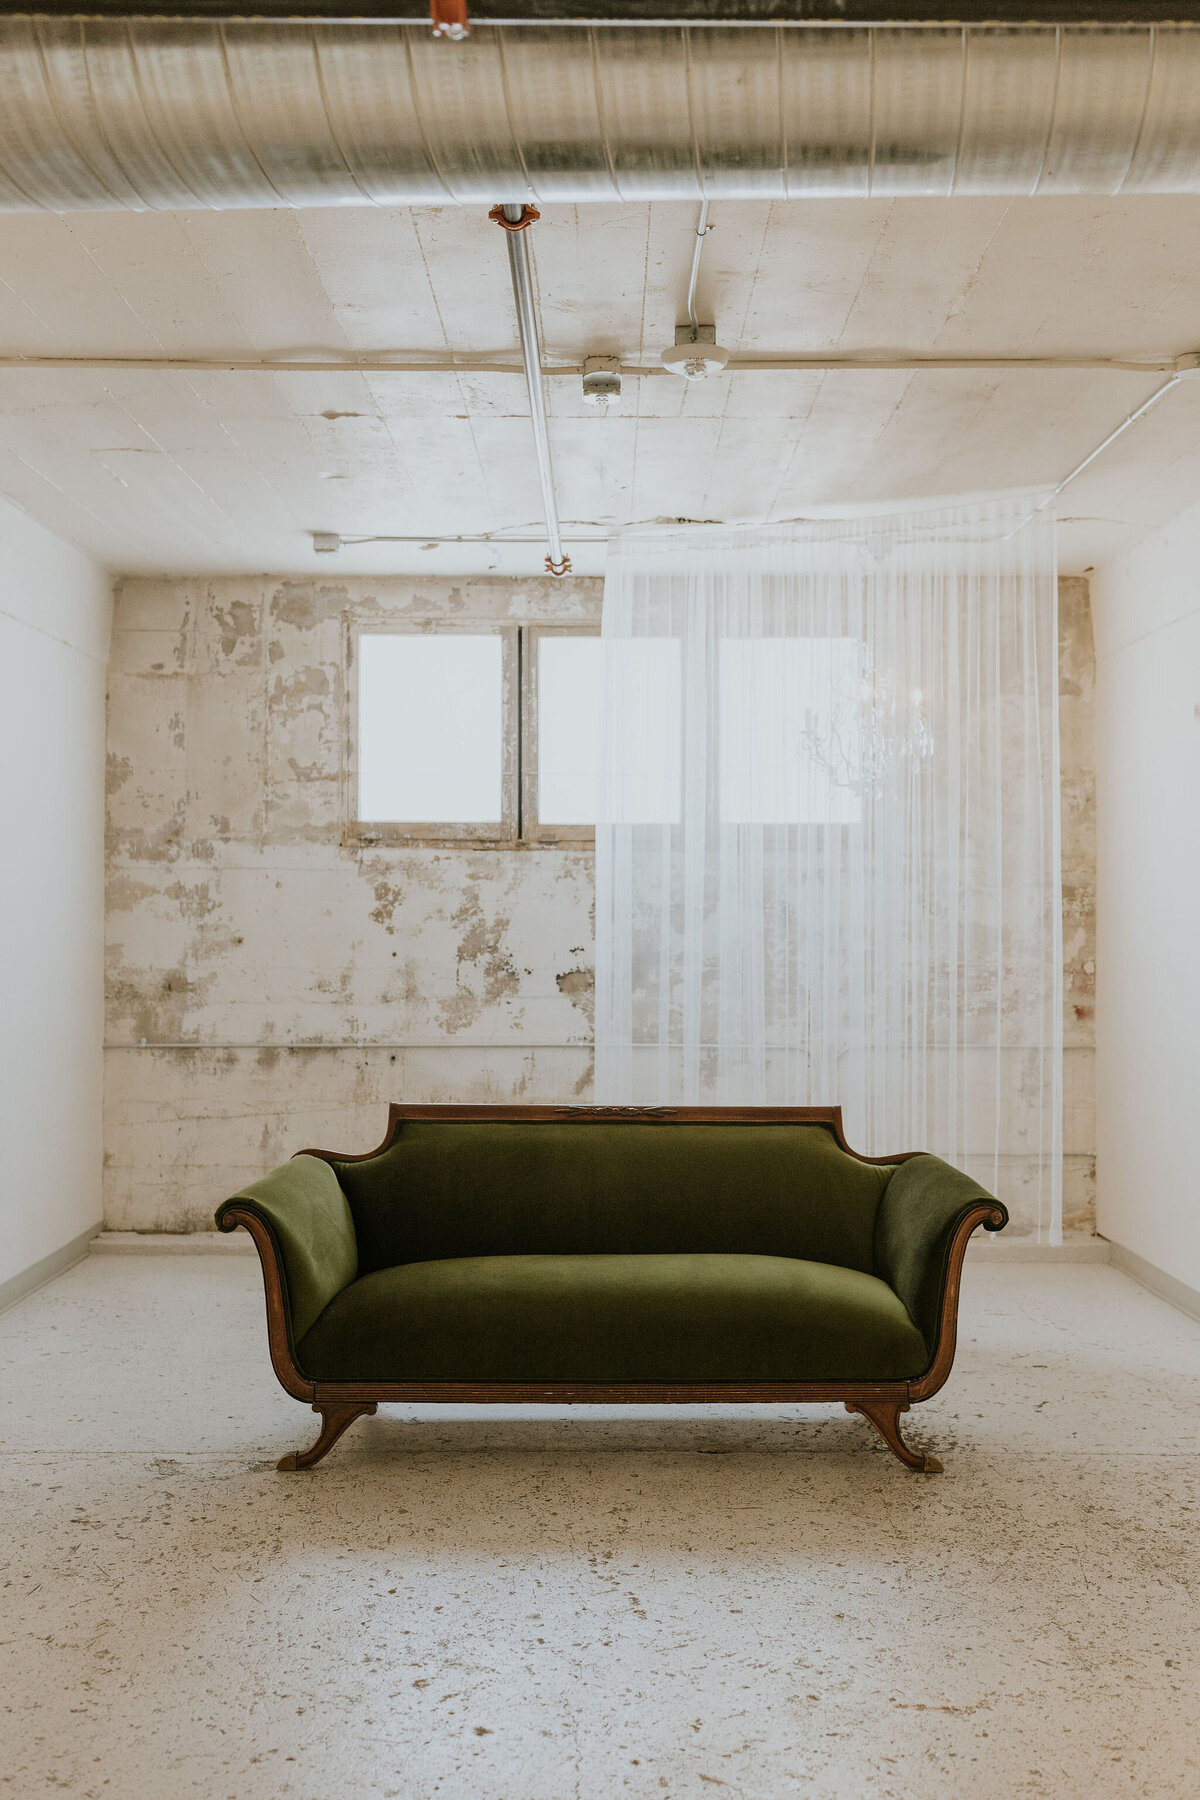 Vintage green sofa at the st vrain wedding venue in Longmont CO.